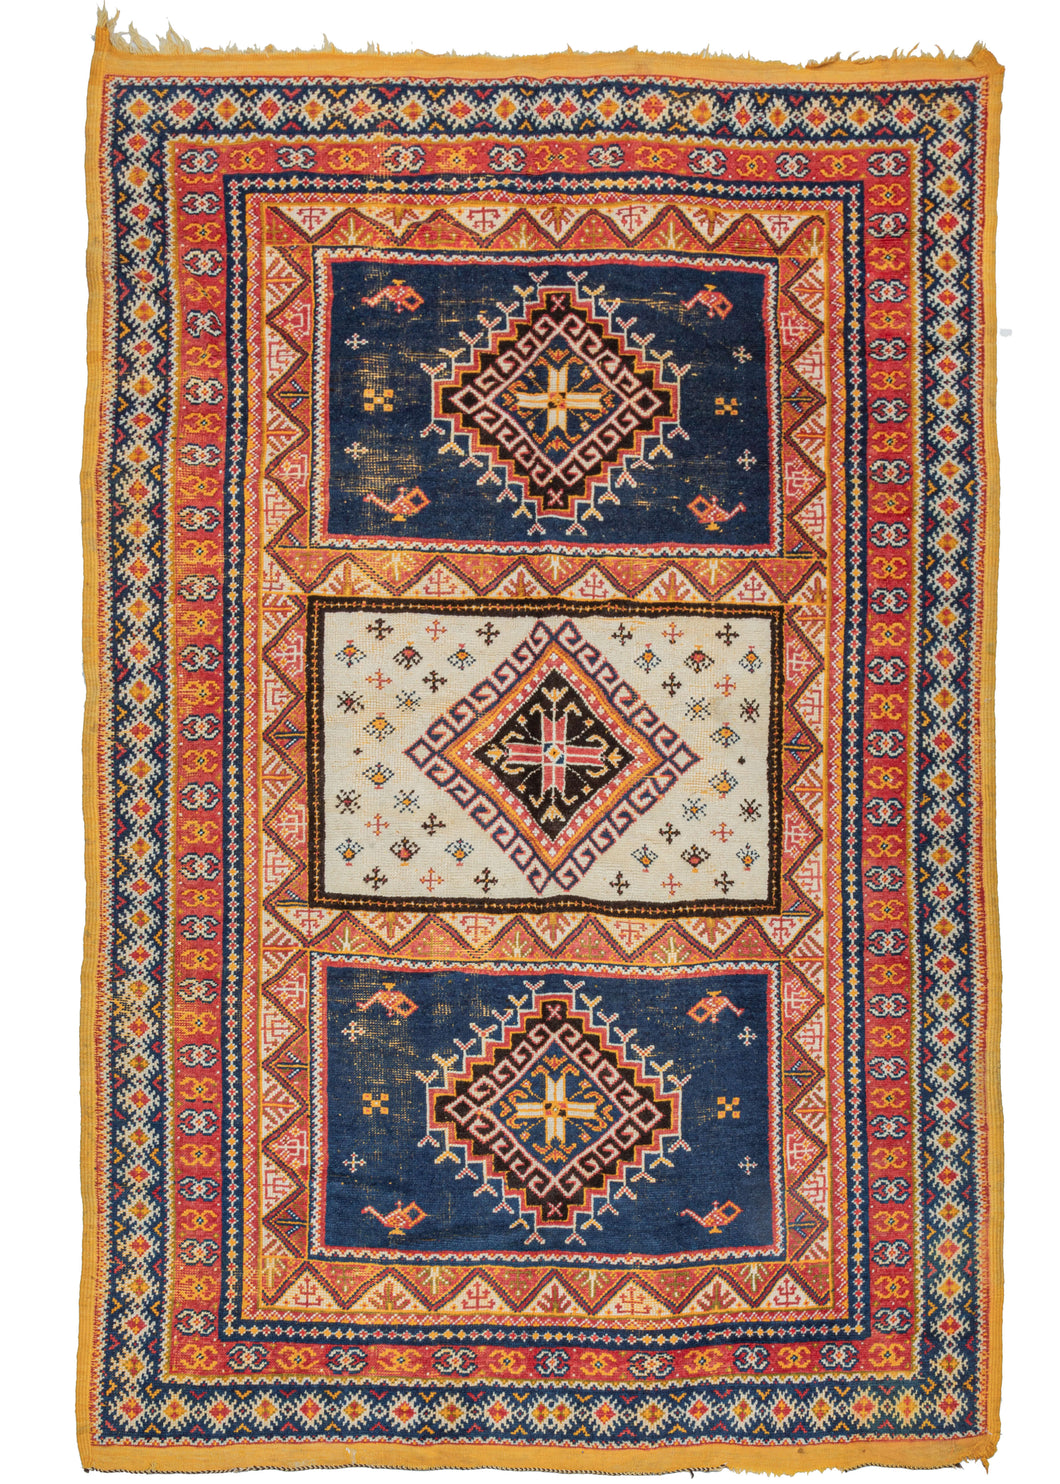 Mid century Moroccan Taznakht area rug featuring a field of three compartments each with a central latch-hooked diamond motif. The center compartment is bright ivory and filled with small protection symbols. The top and bottom compartments feature a more sparse design around a stepped diamond on a navy ground. Of note in the top and bottom compartments are the depiction of oil or 